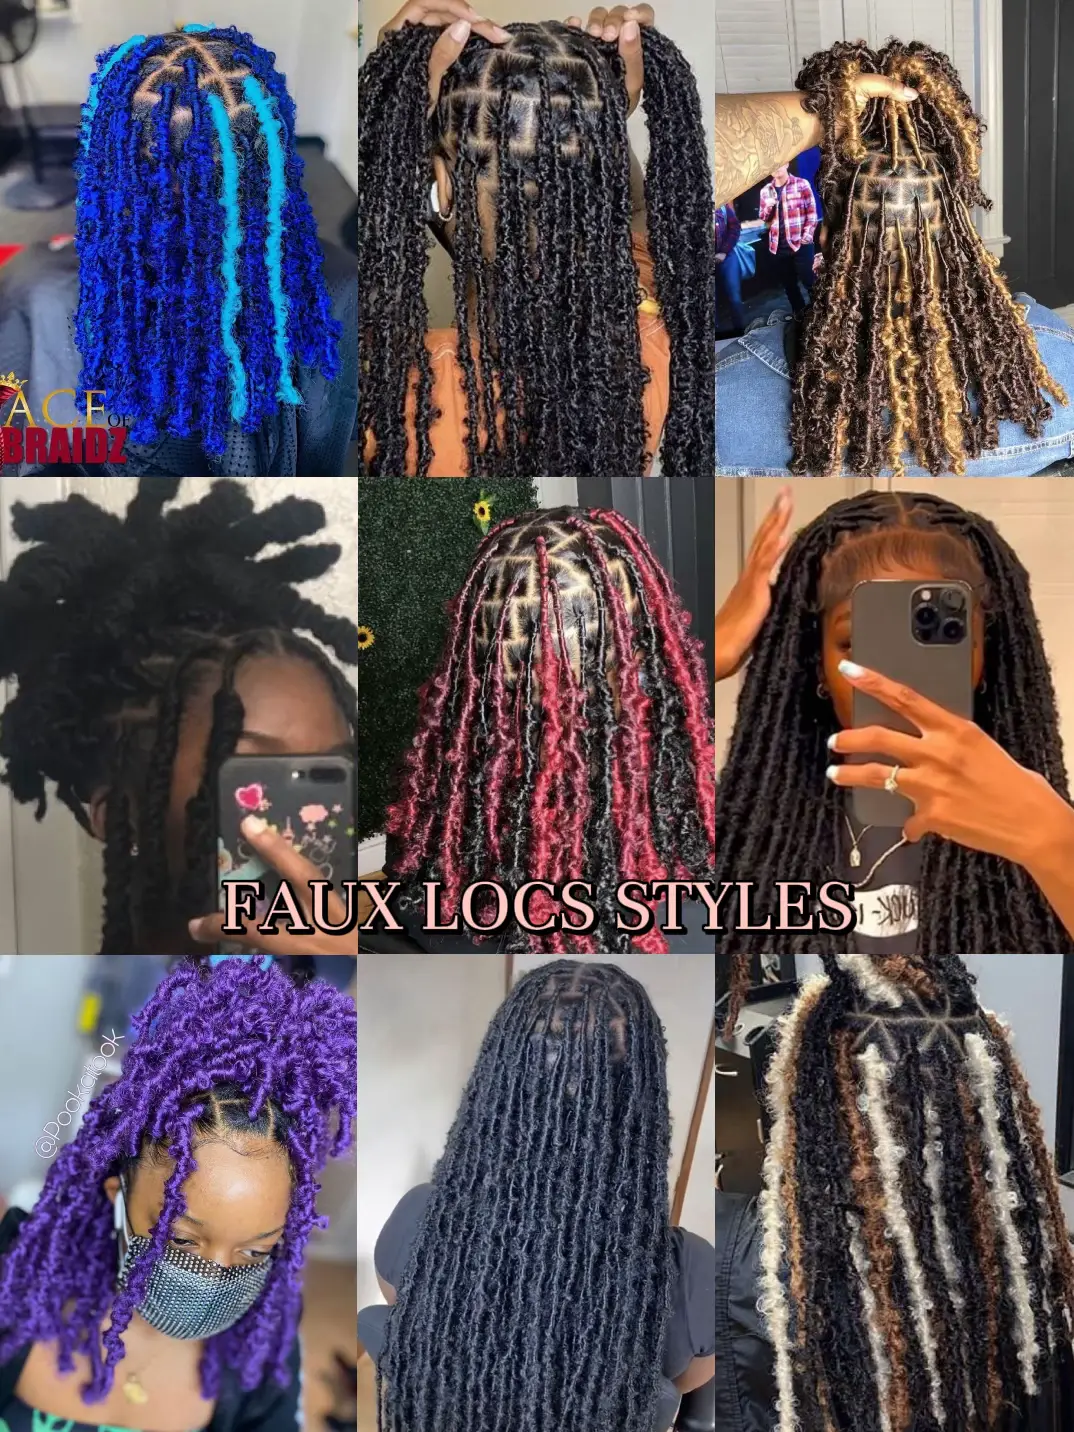 50+ Stunning Crochet Braids to Style Your Hair - The Cuddl  Crochet braids  hairstyles, Braided hairstyles, Crochet hair styles